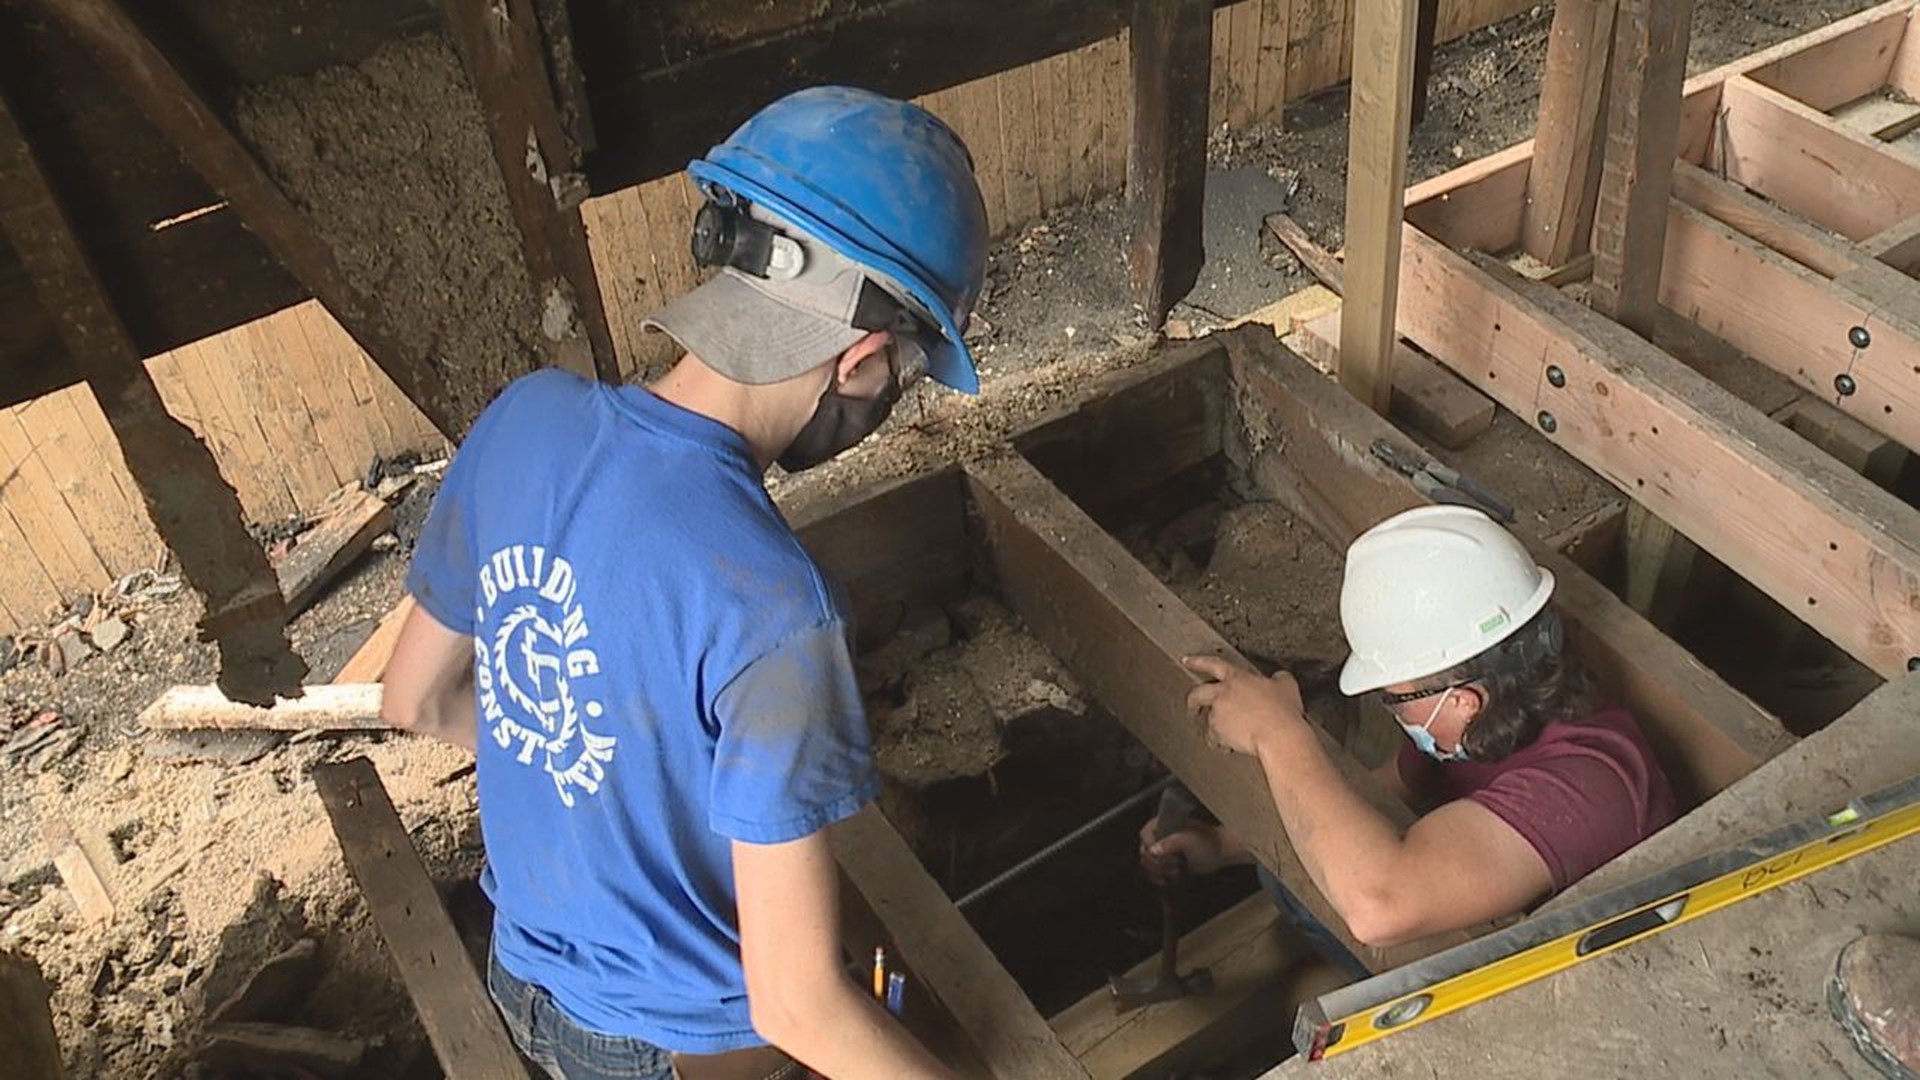 Dauphin County Technical School students renovate a home Harrisburg.